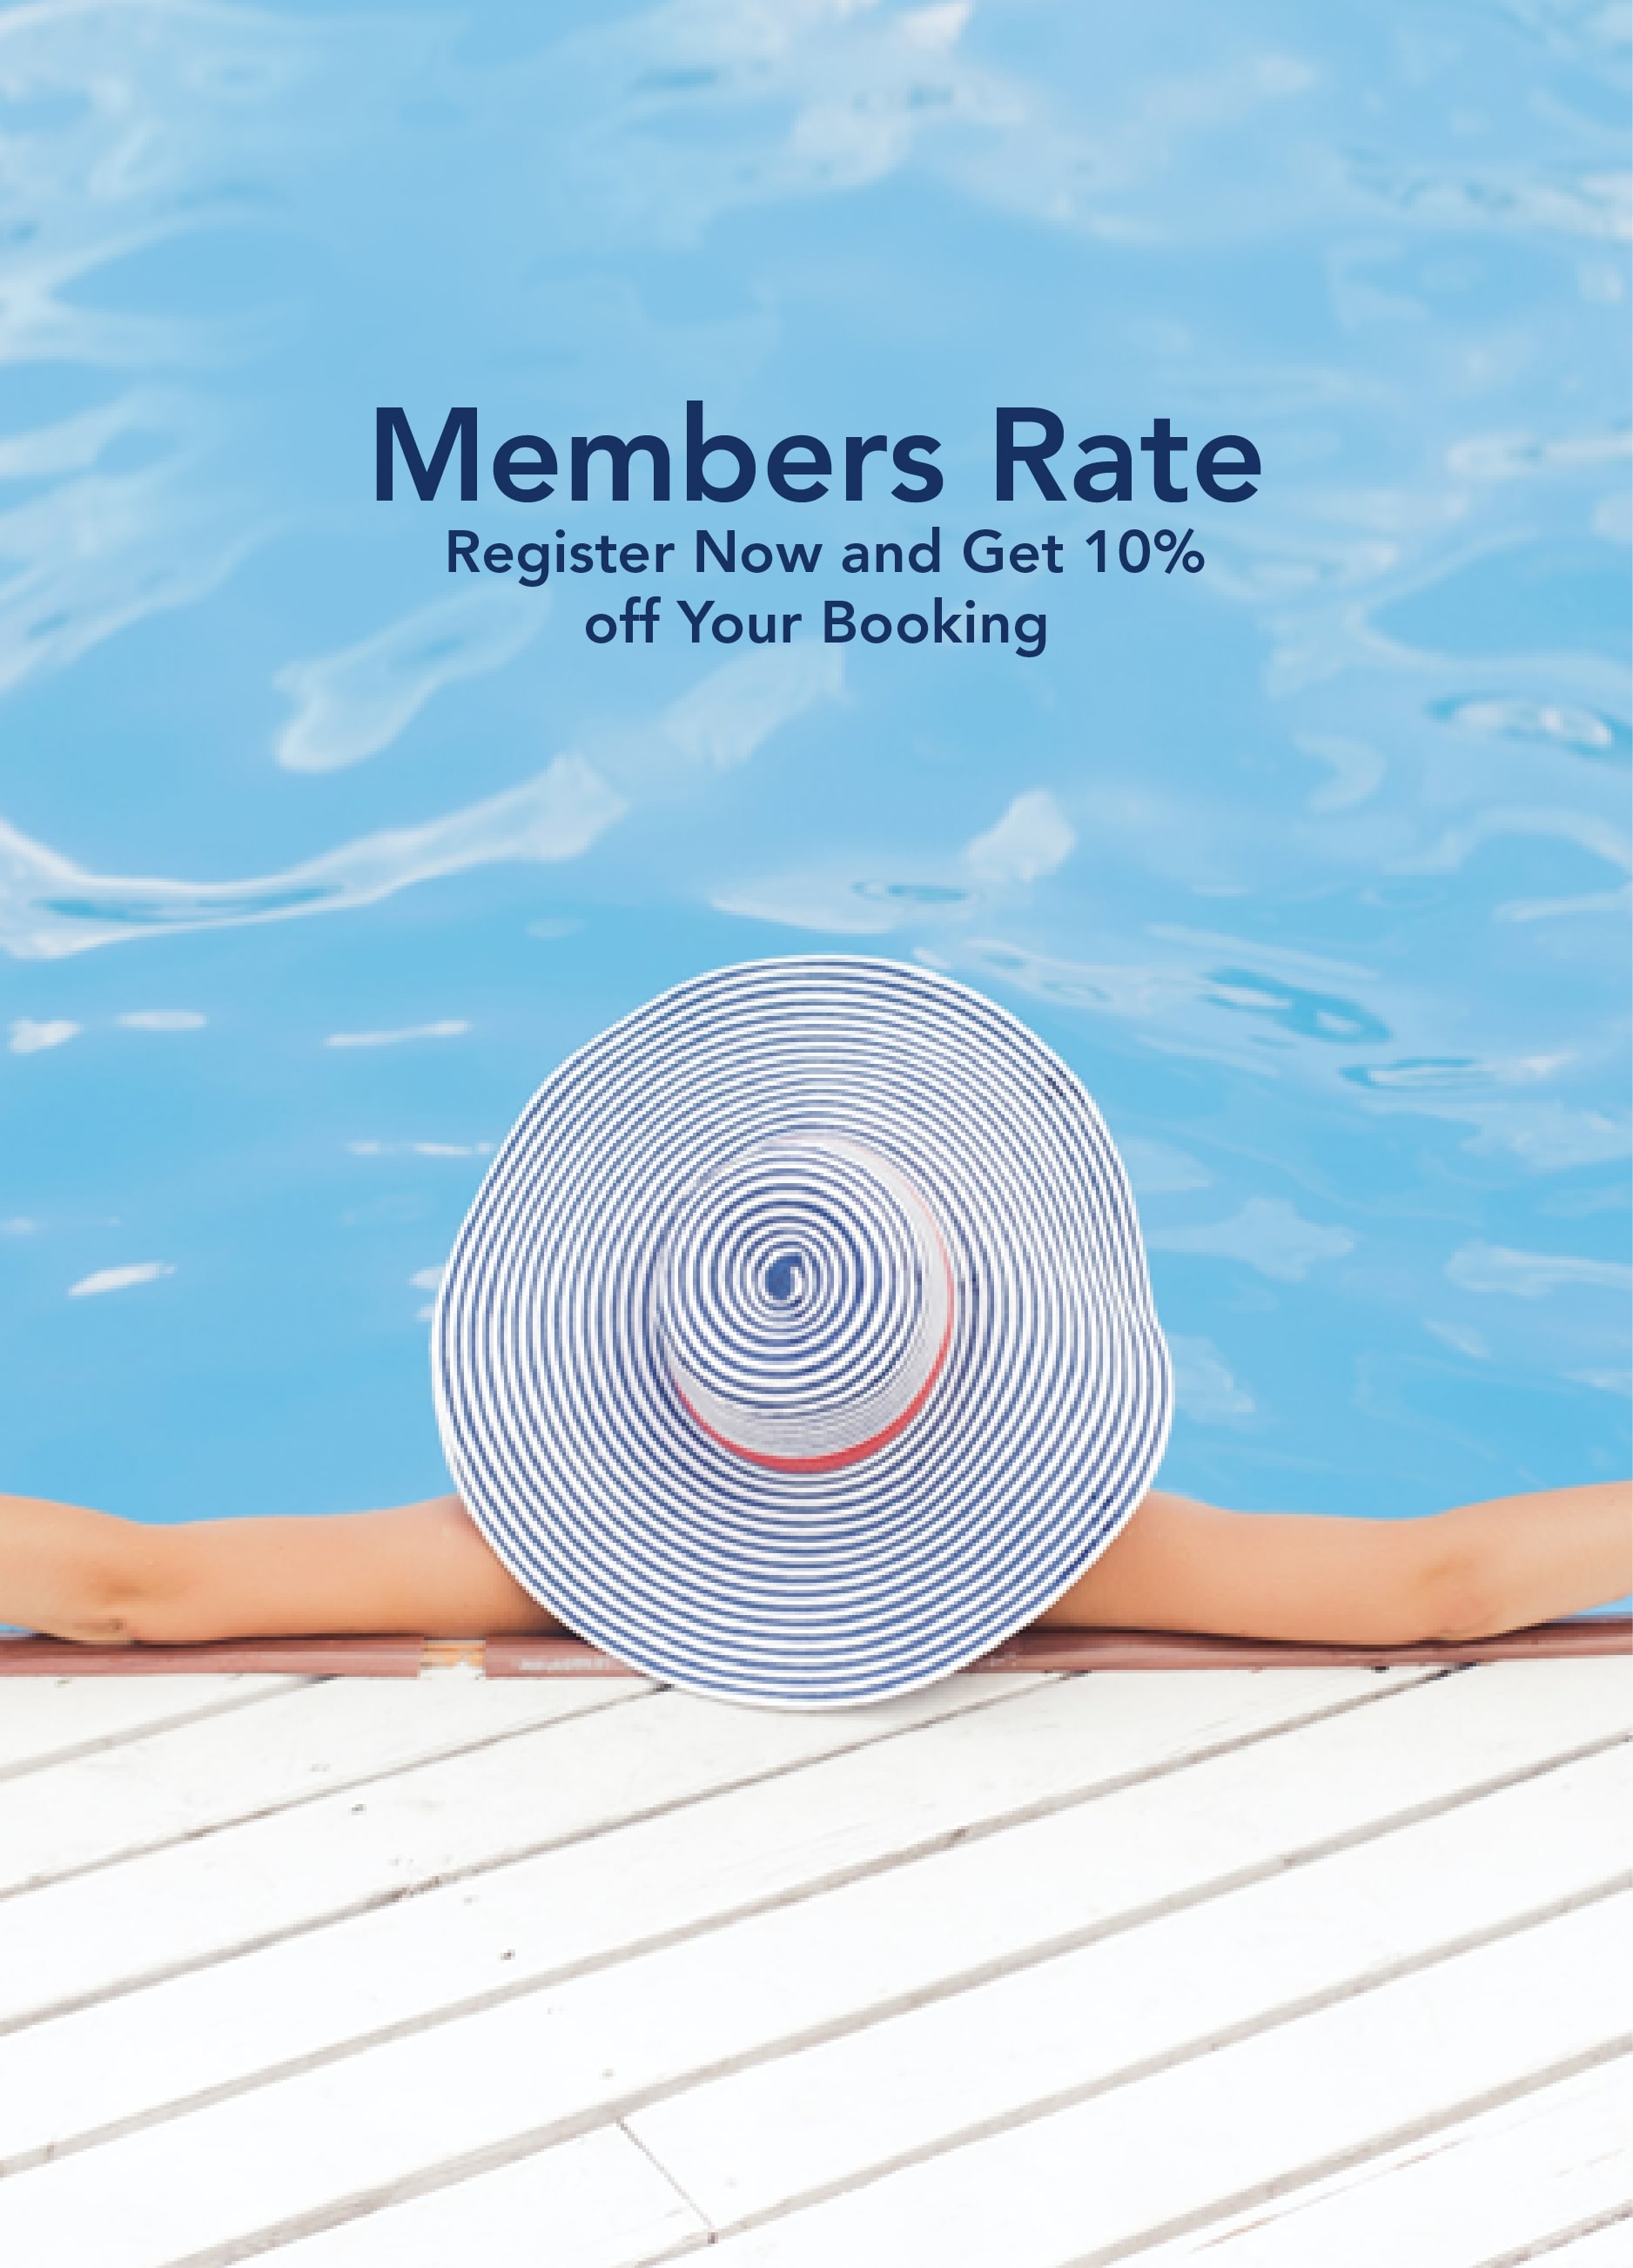 Members Rate - Register Now and Get 10% off Your Booking